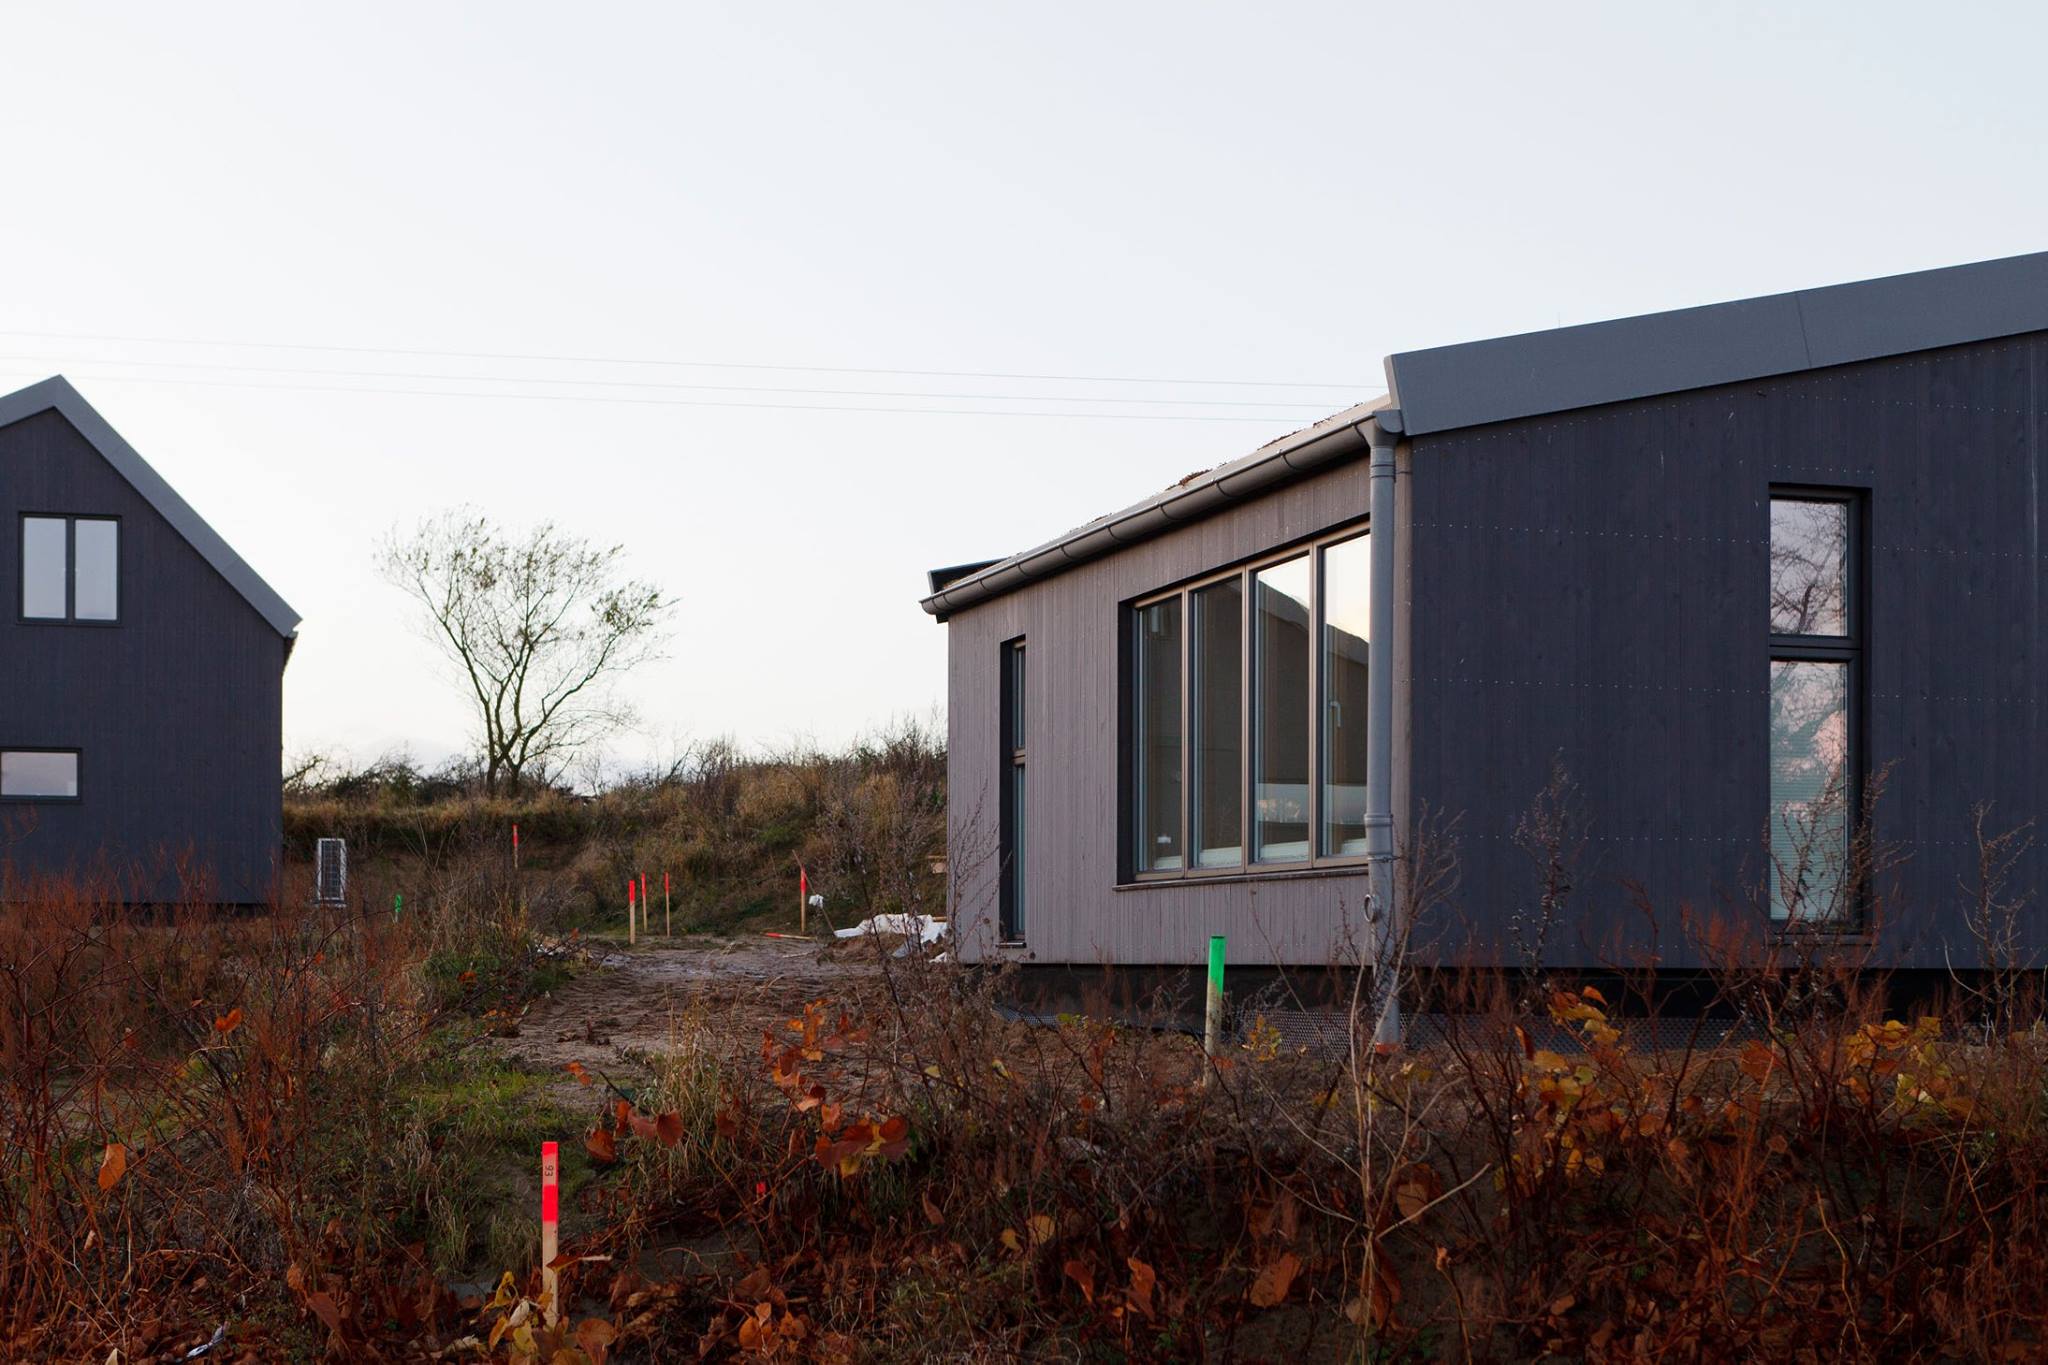 Holiday Home by the Baltic Sea by Studio OINK